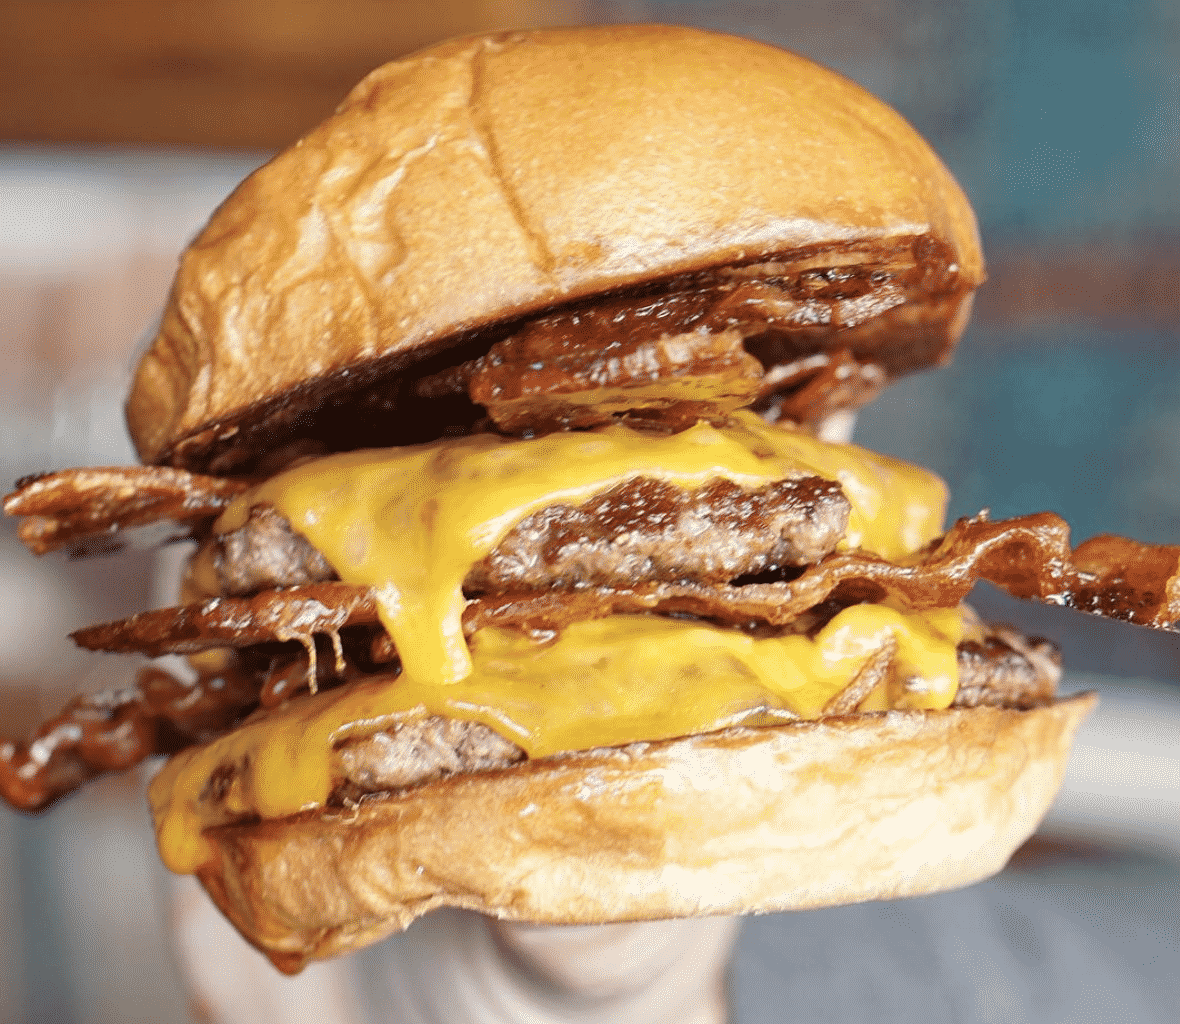 The 25 Best New Jersey Burgers